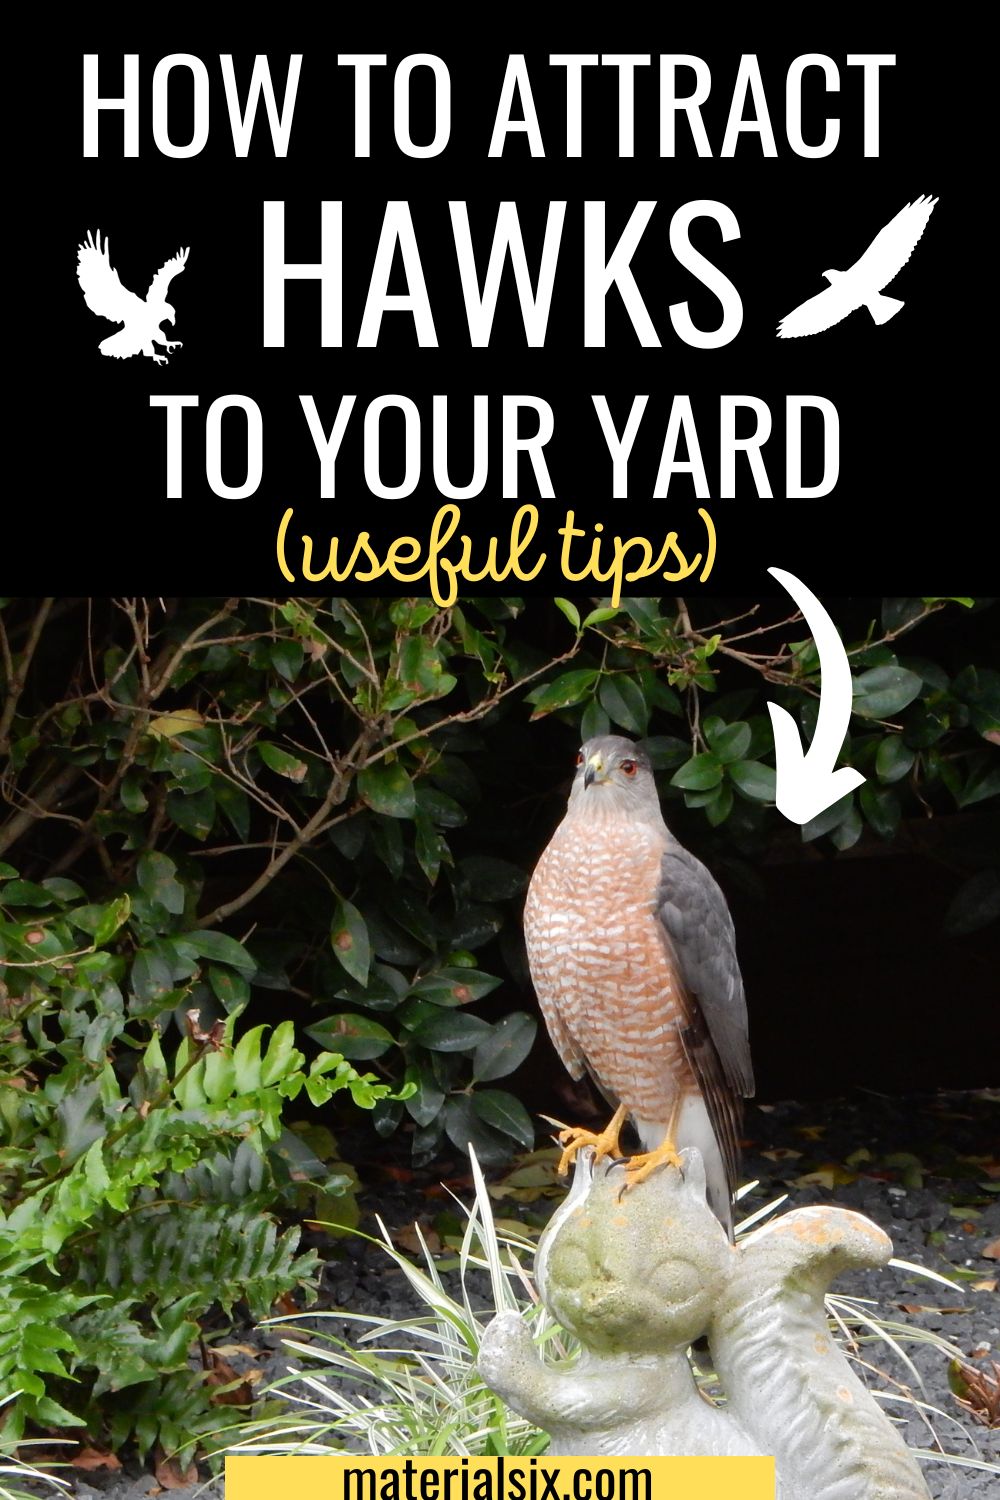 How to Attract Hawks to Your Yard